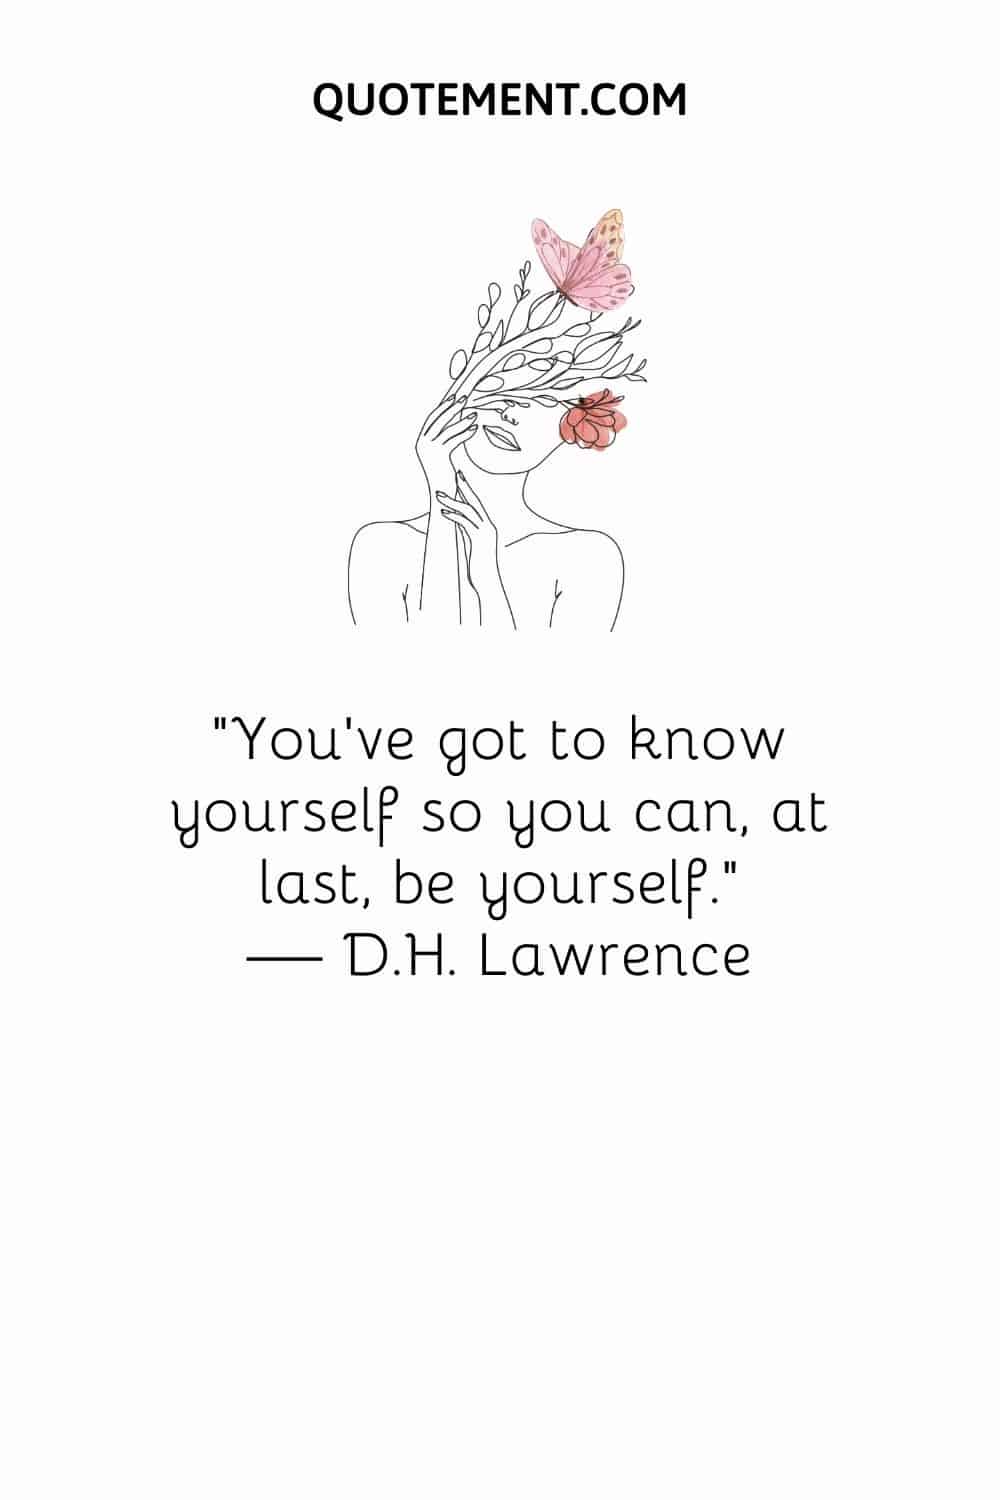 You've got to know yourself so you can, at last, be yourself